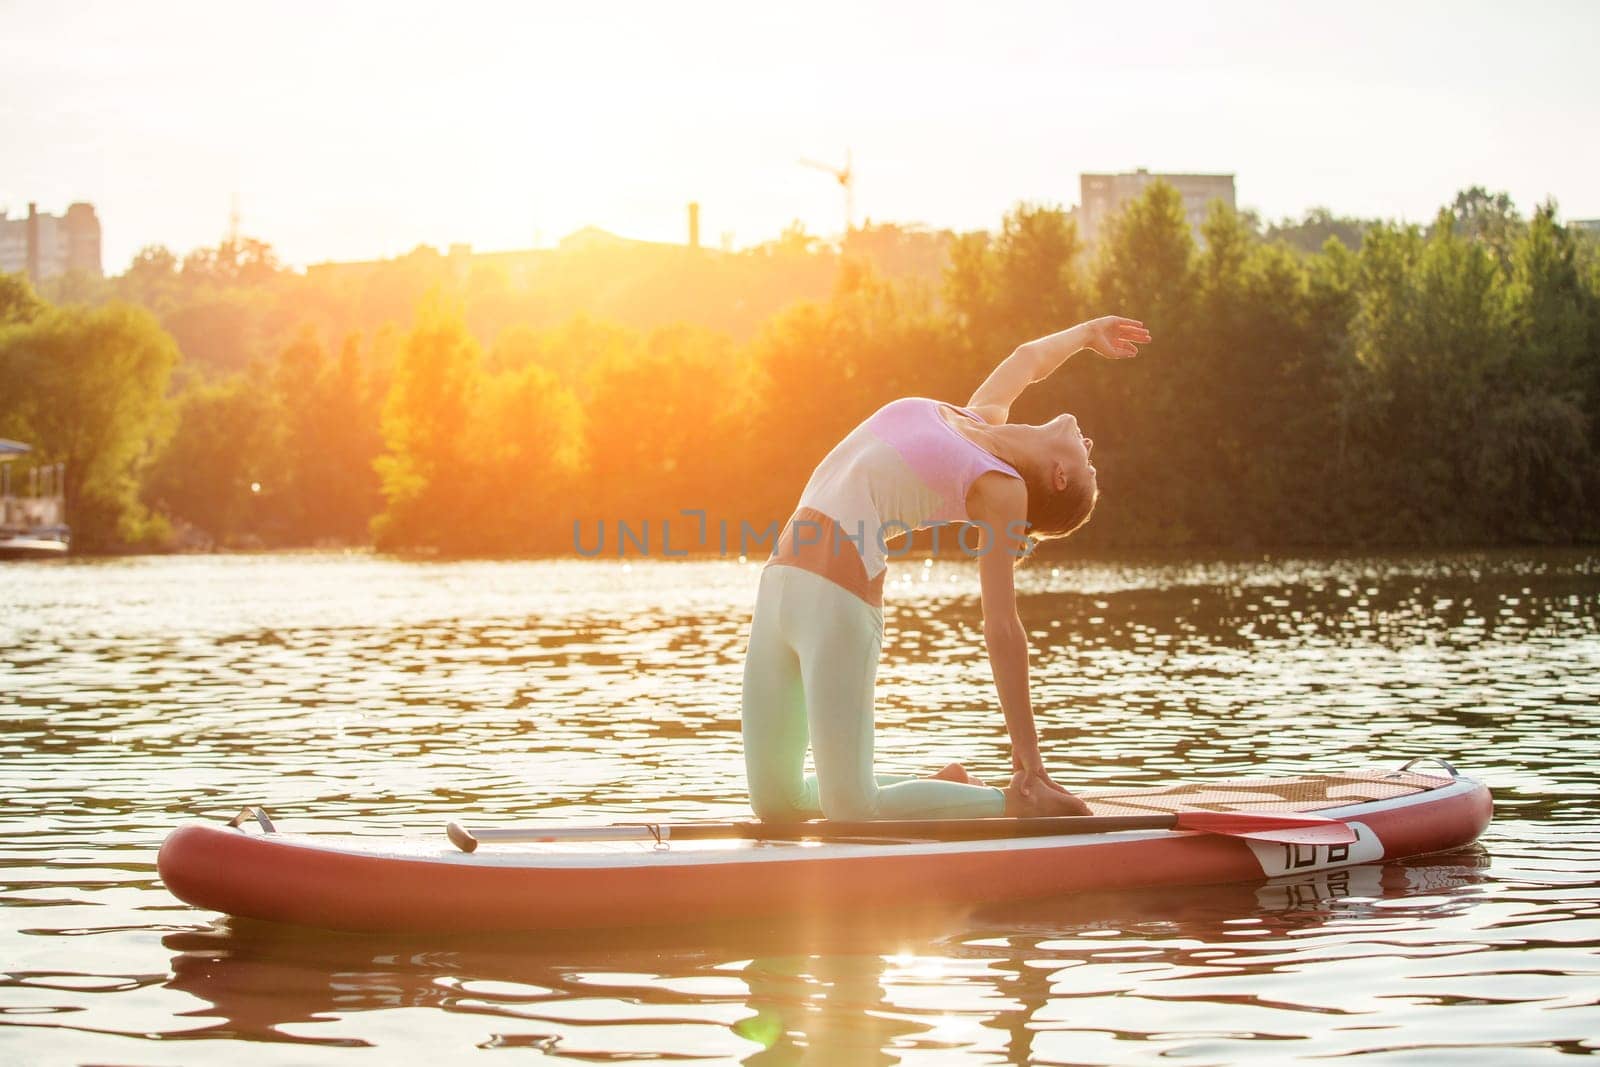 Young woman doing yoga on sup board with paddle. Yoga pose, side view - concept of harmony with the nature. by nazarovsergey